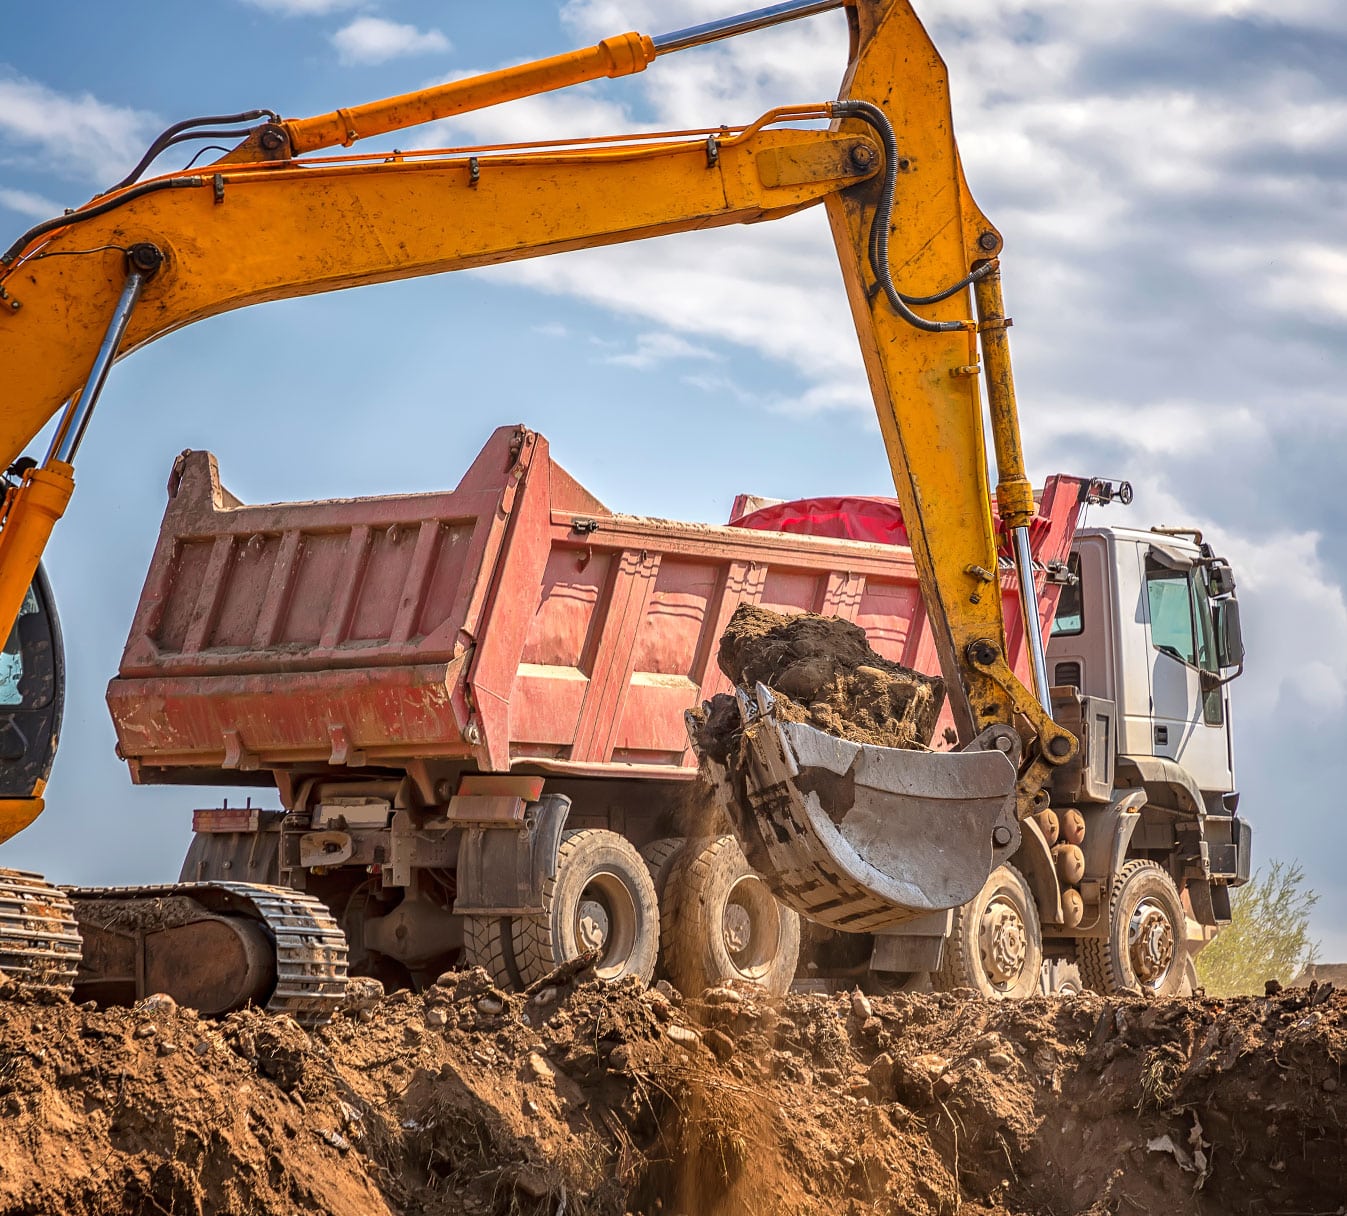 Heavy Equipment Accident Lawyer in New York City